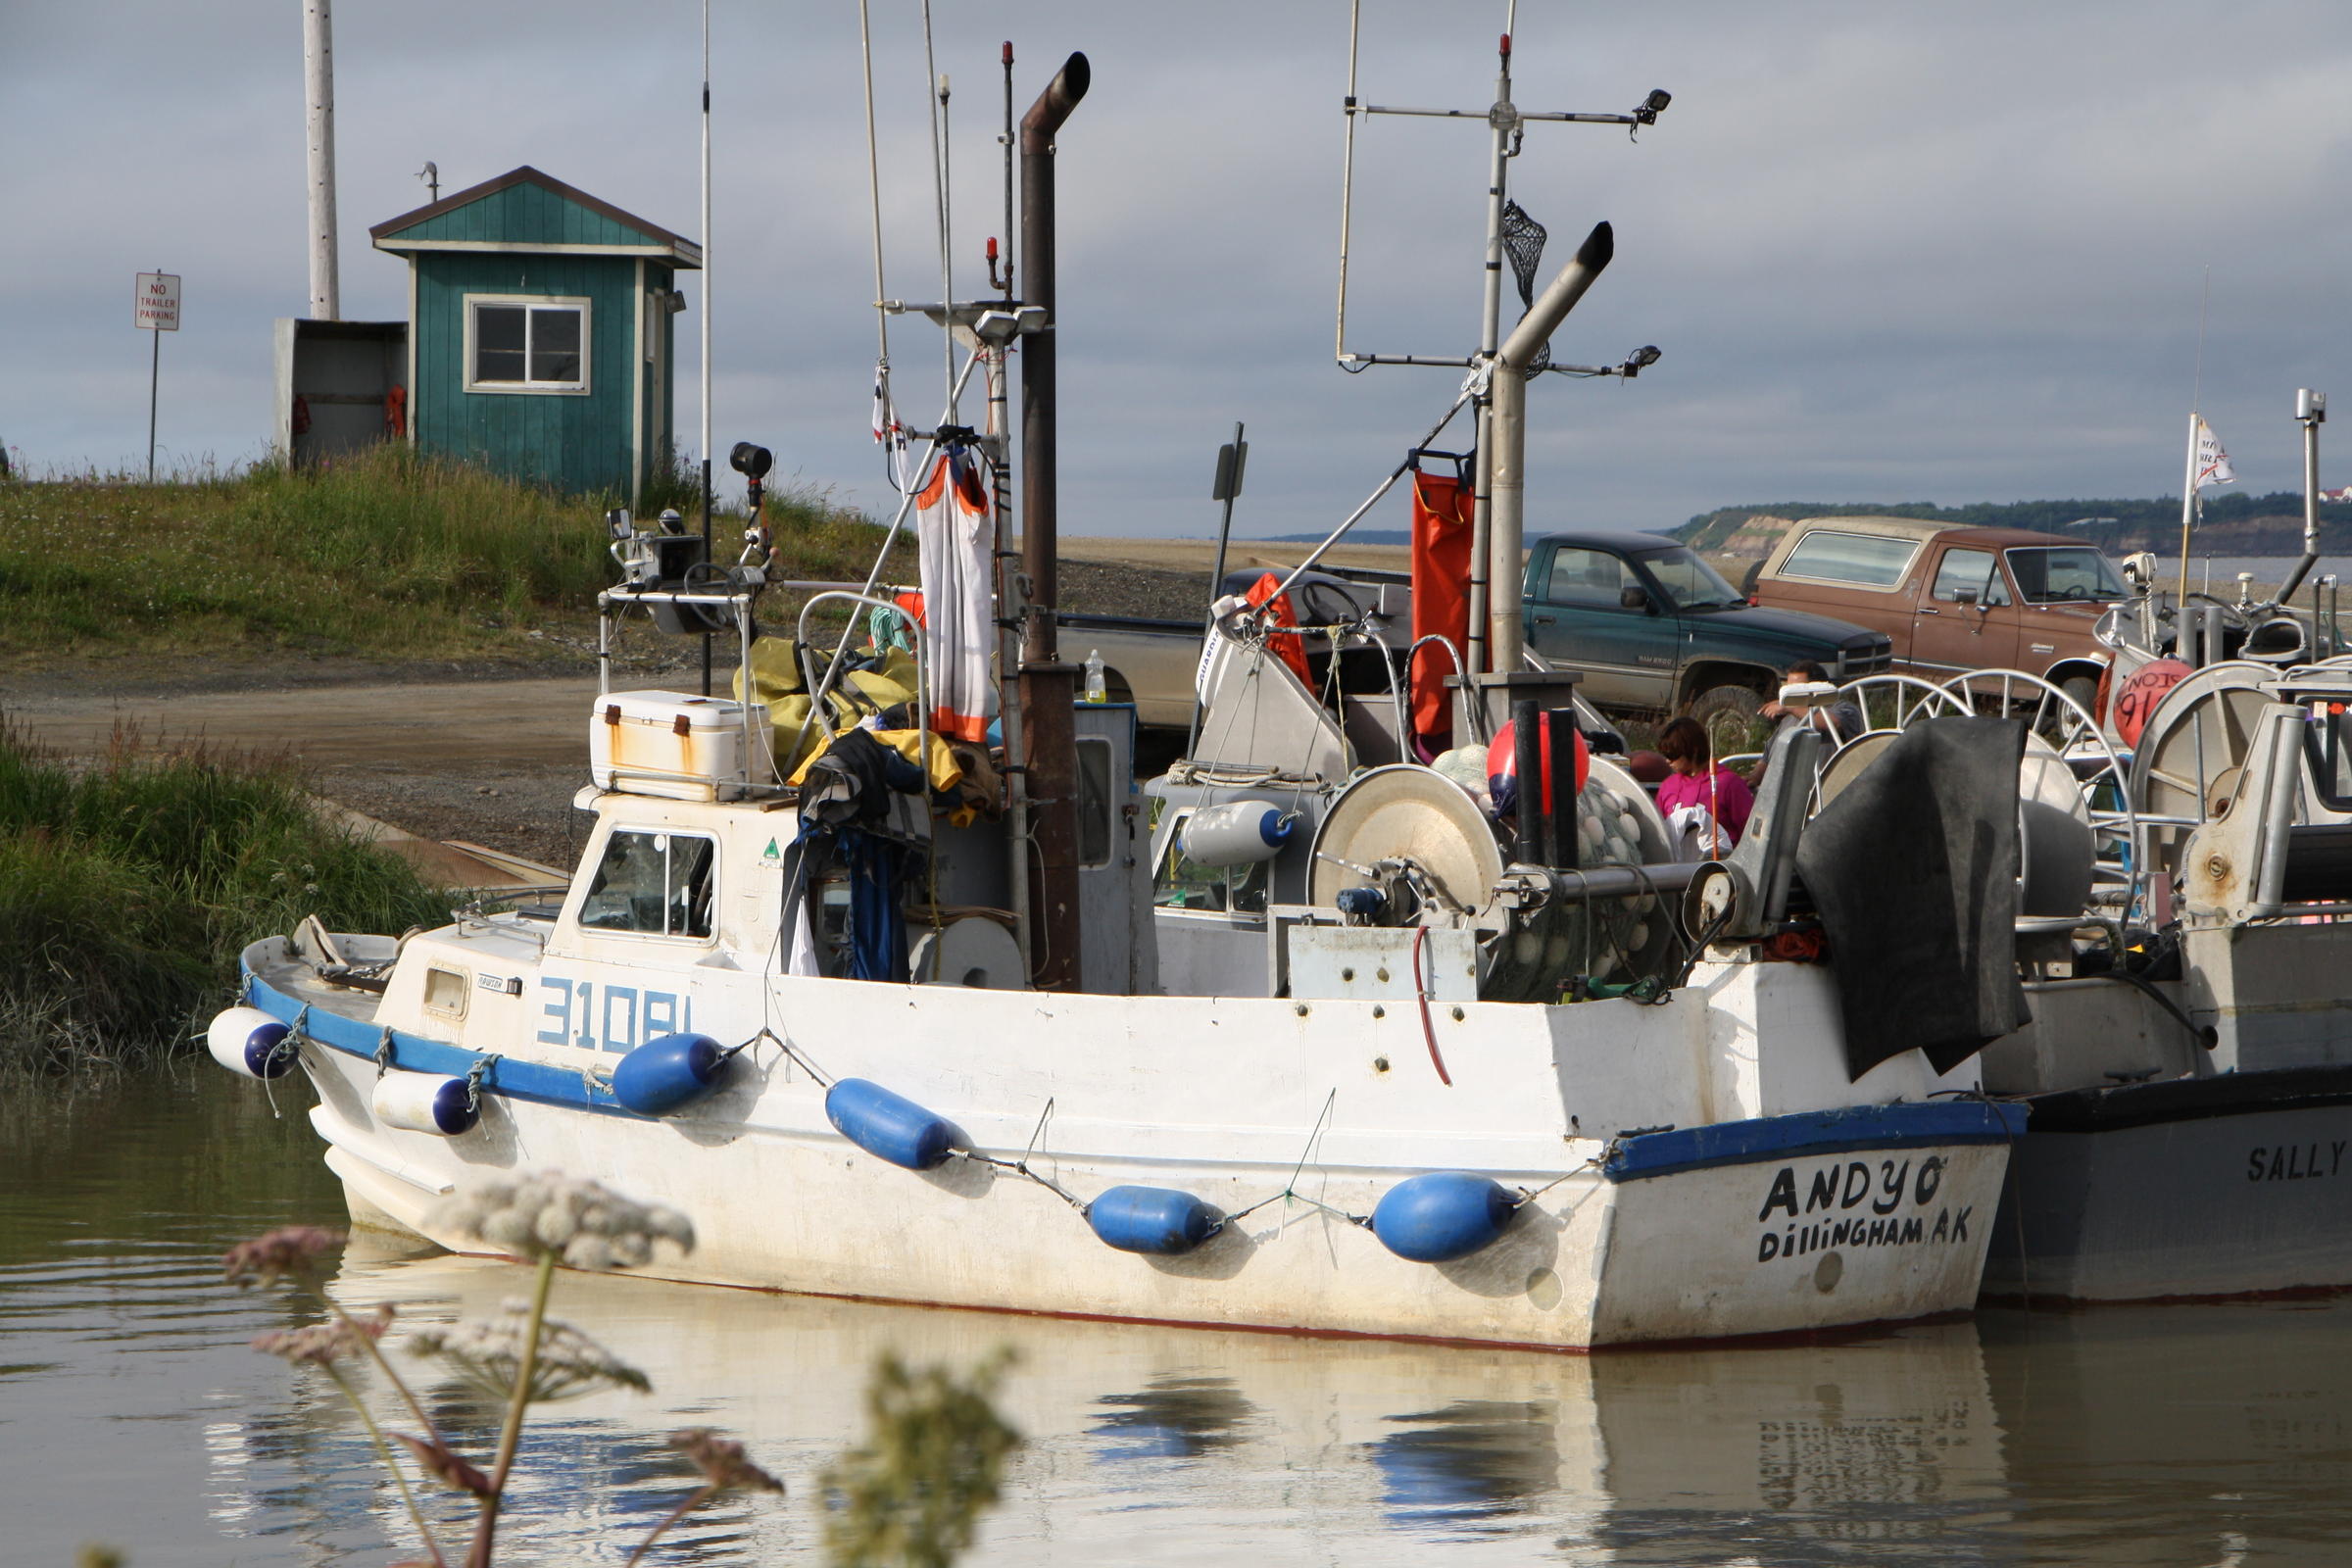 Police allege heroin was being trafficked from the Andy O, a Bristol Bay drifter tied up in the Dillingham Harbor. The vessel is pictured here Monday, after police boarded and arrested operator Andrew Olsen. (Photo by Avery Lill/KDLG)